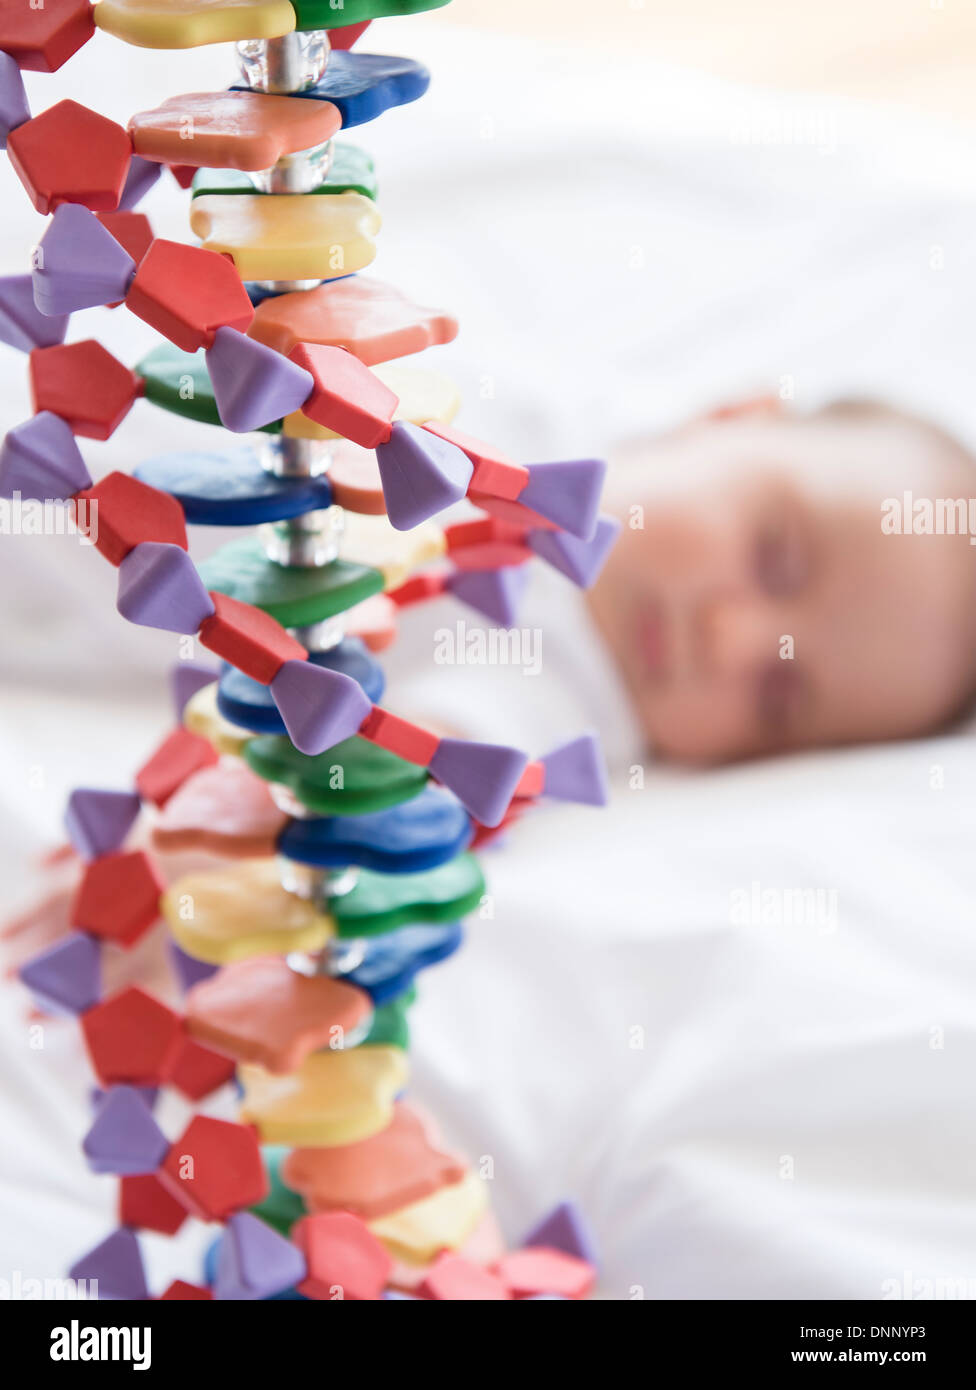 Baby girl (2-5 months) sleeping in bed behind DNA model Stock Photo